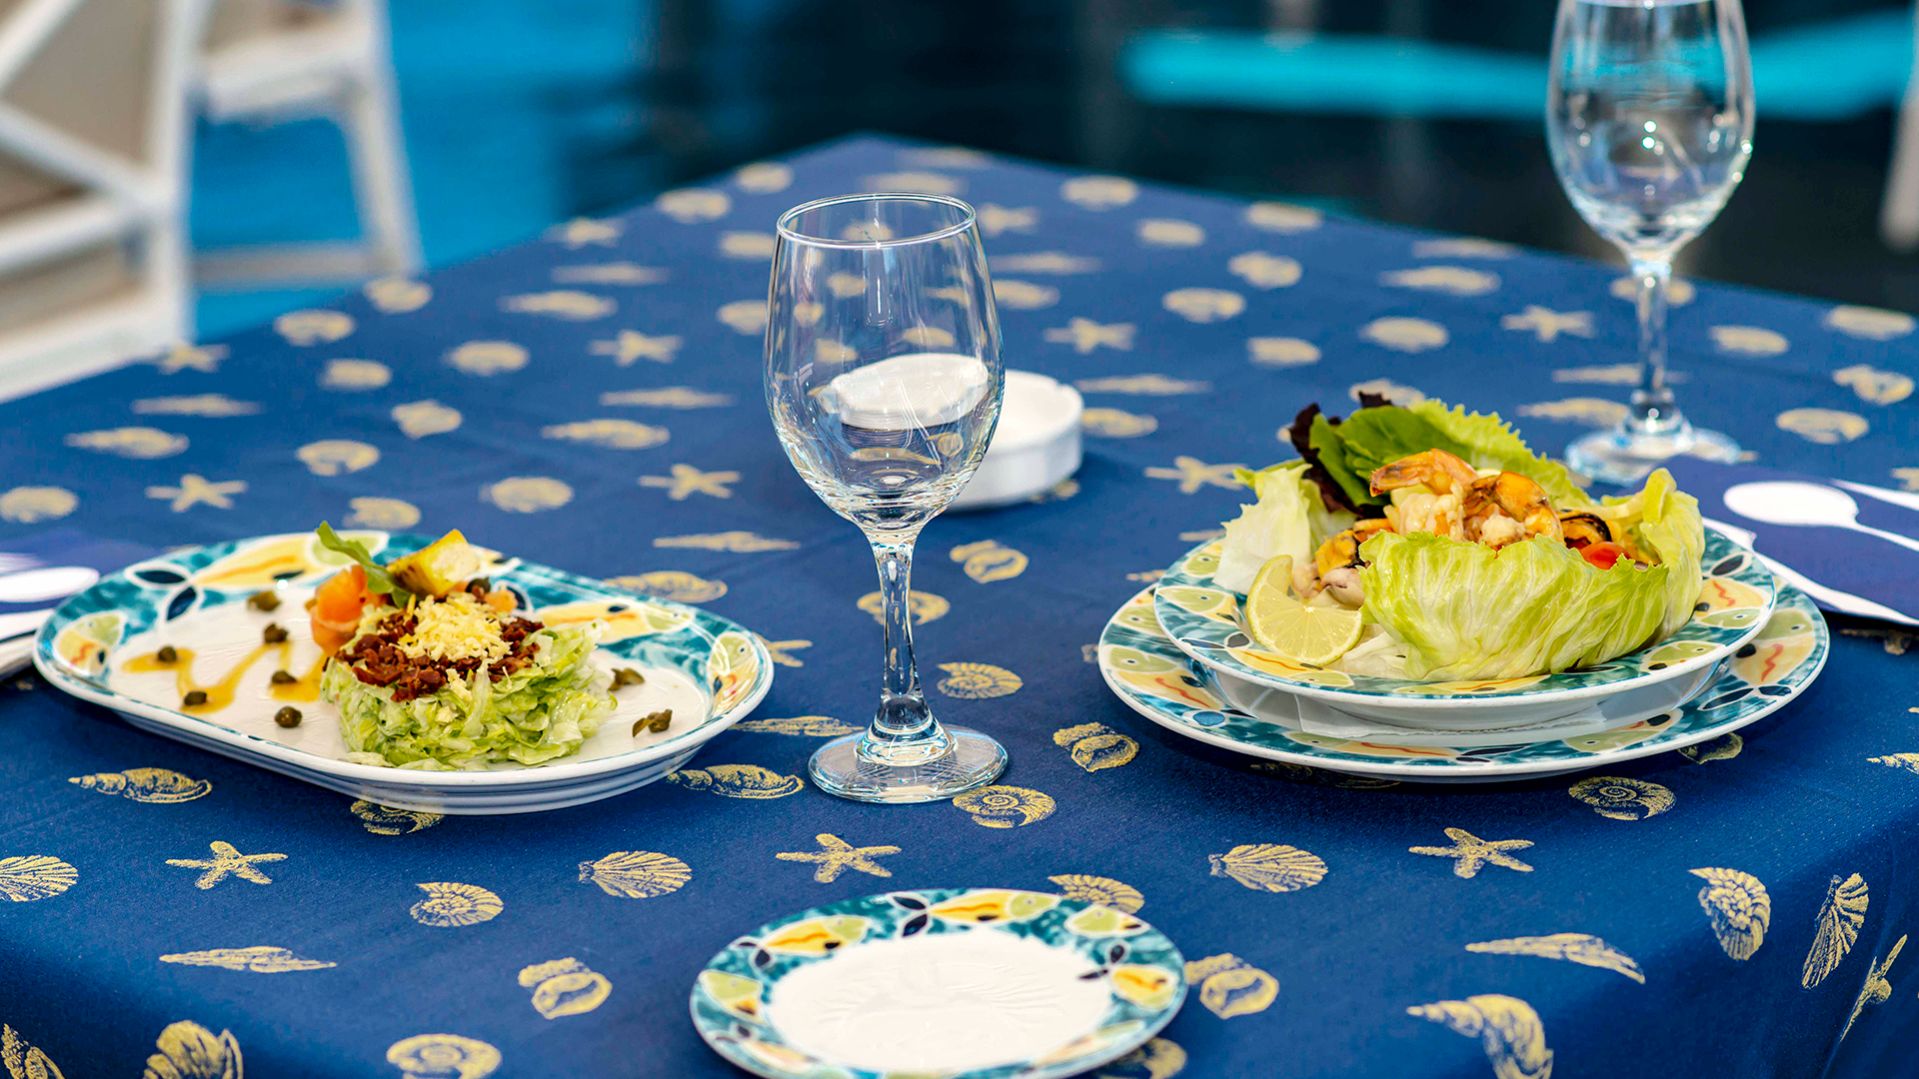 A Blue And White Plate Sitting On Top Of A Table With Wine Glasses